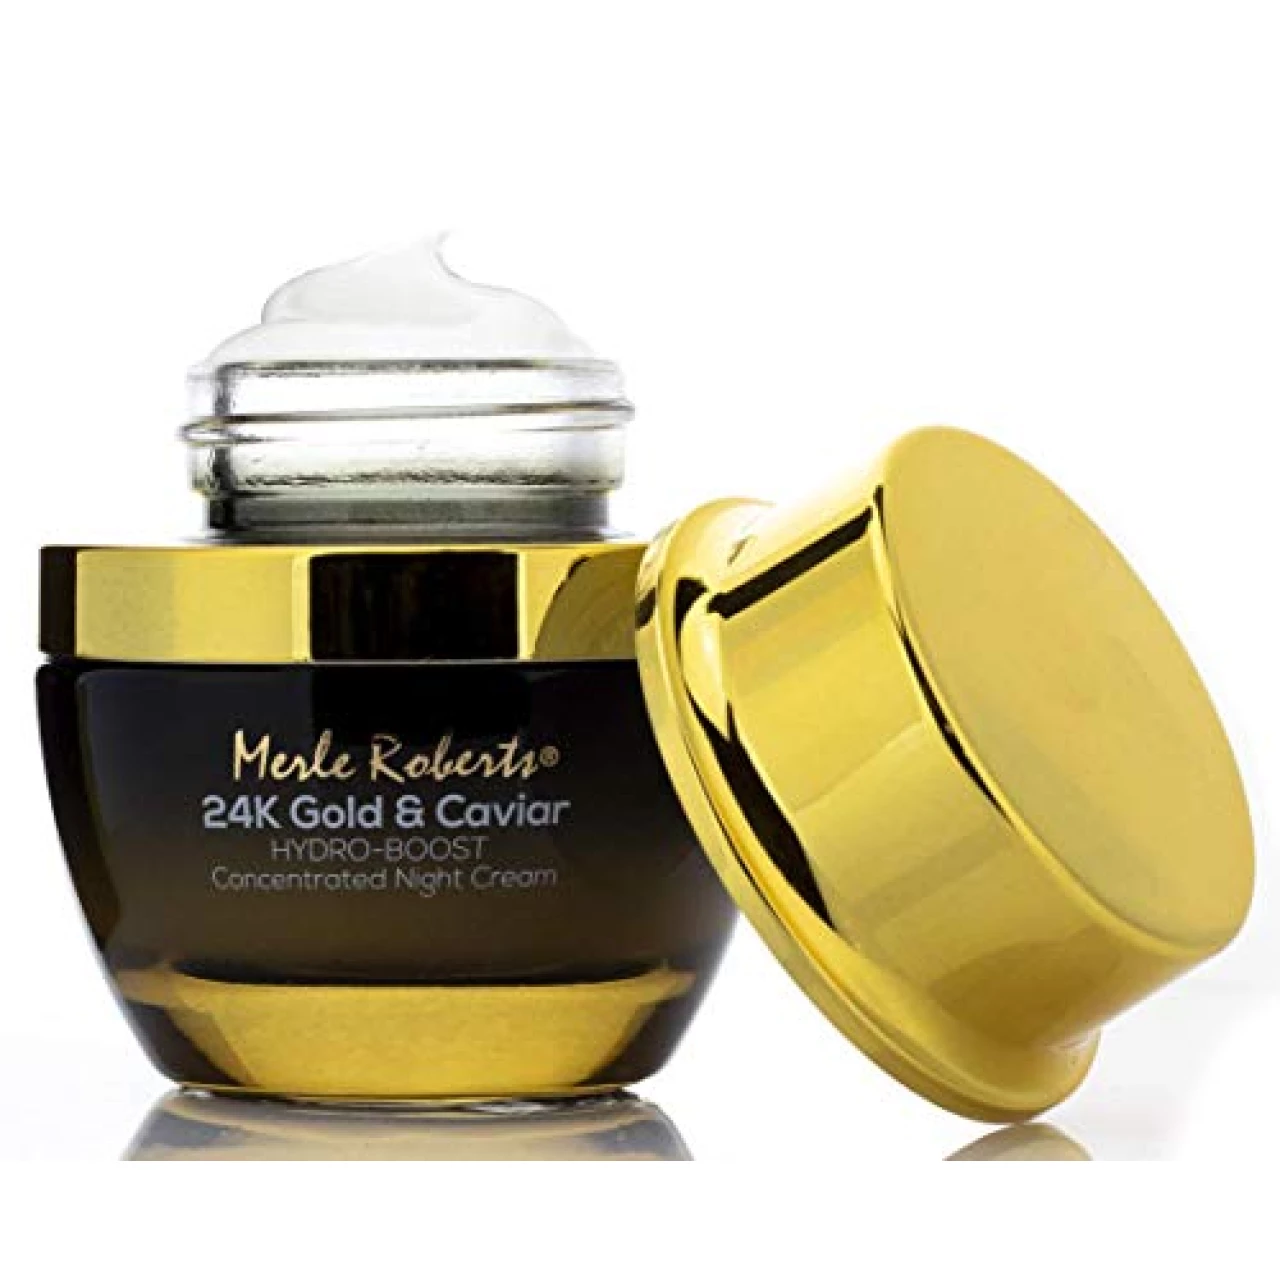 Merle Roberts 24k Gold and Caviar Concentrated Night Cream Intensely Hydrating Anti-Aging Night Cream for Face